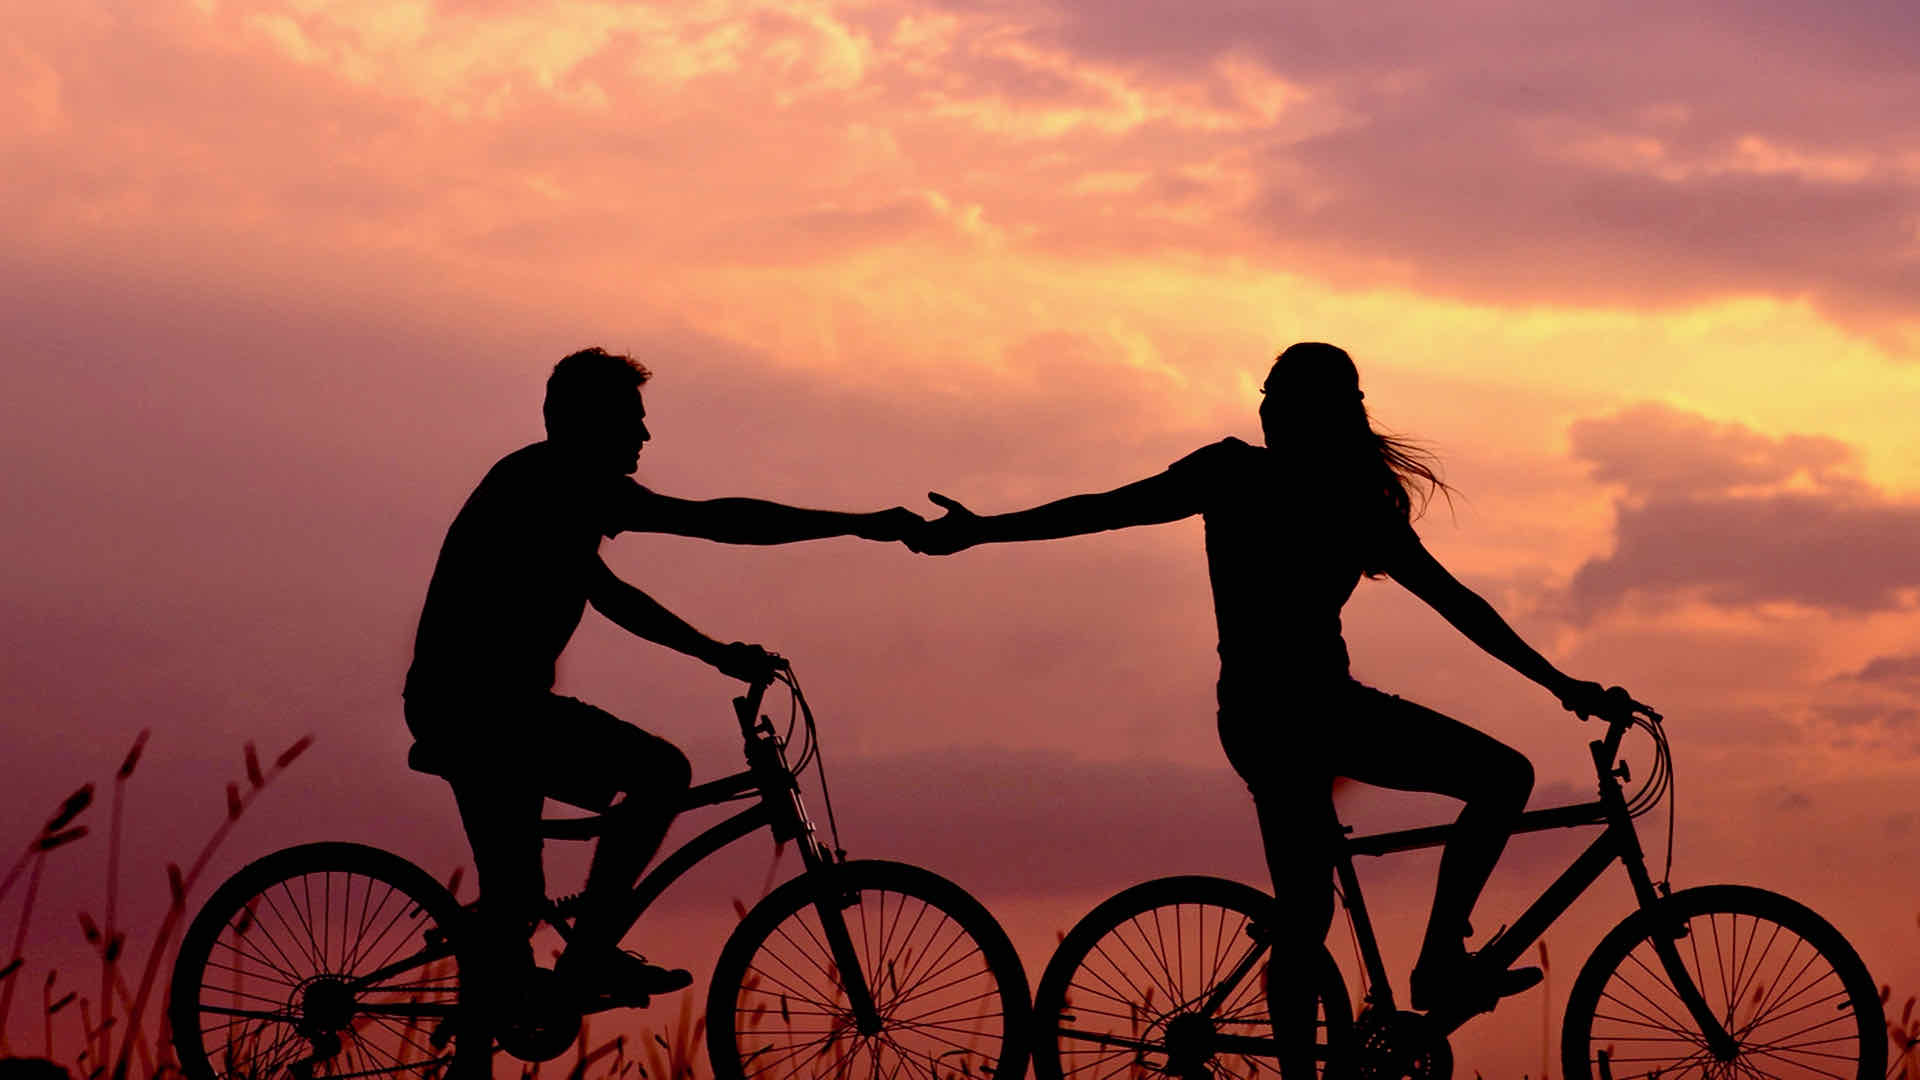 Holding hands on bicycle